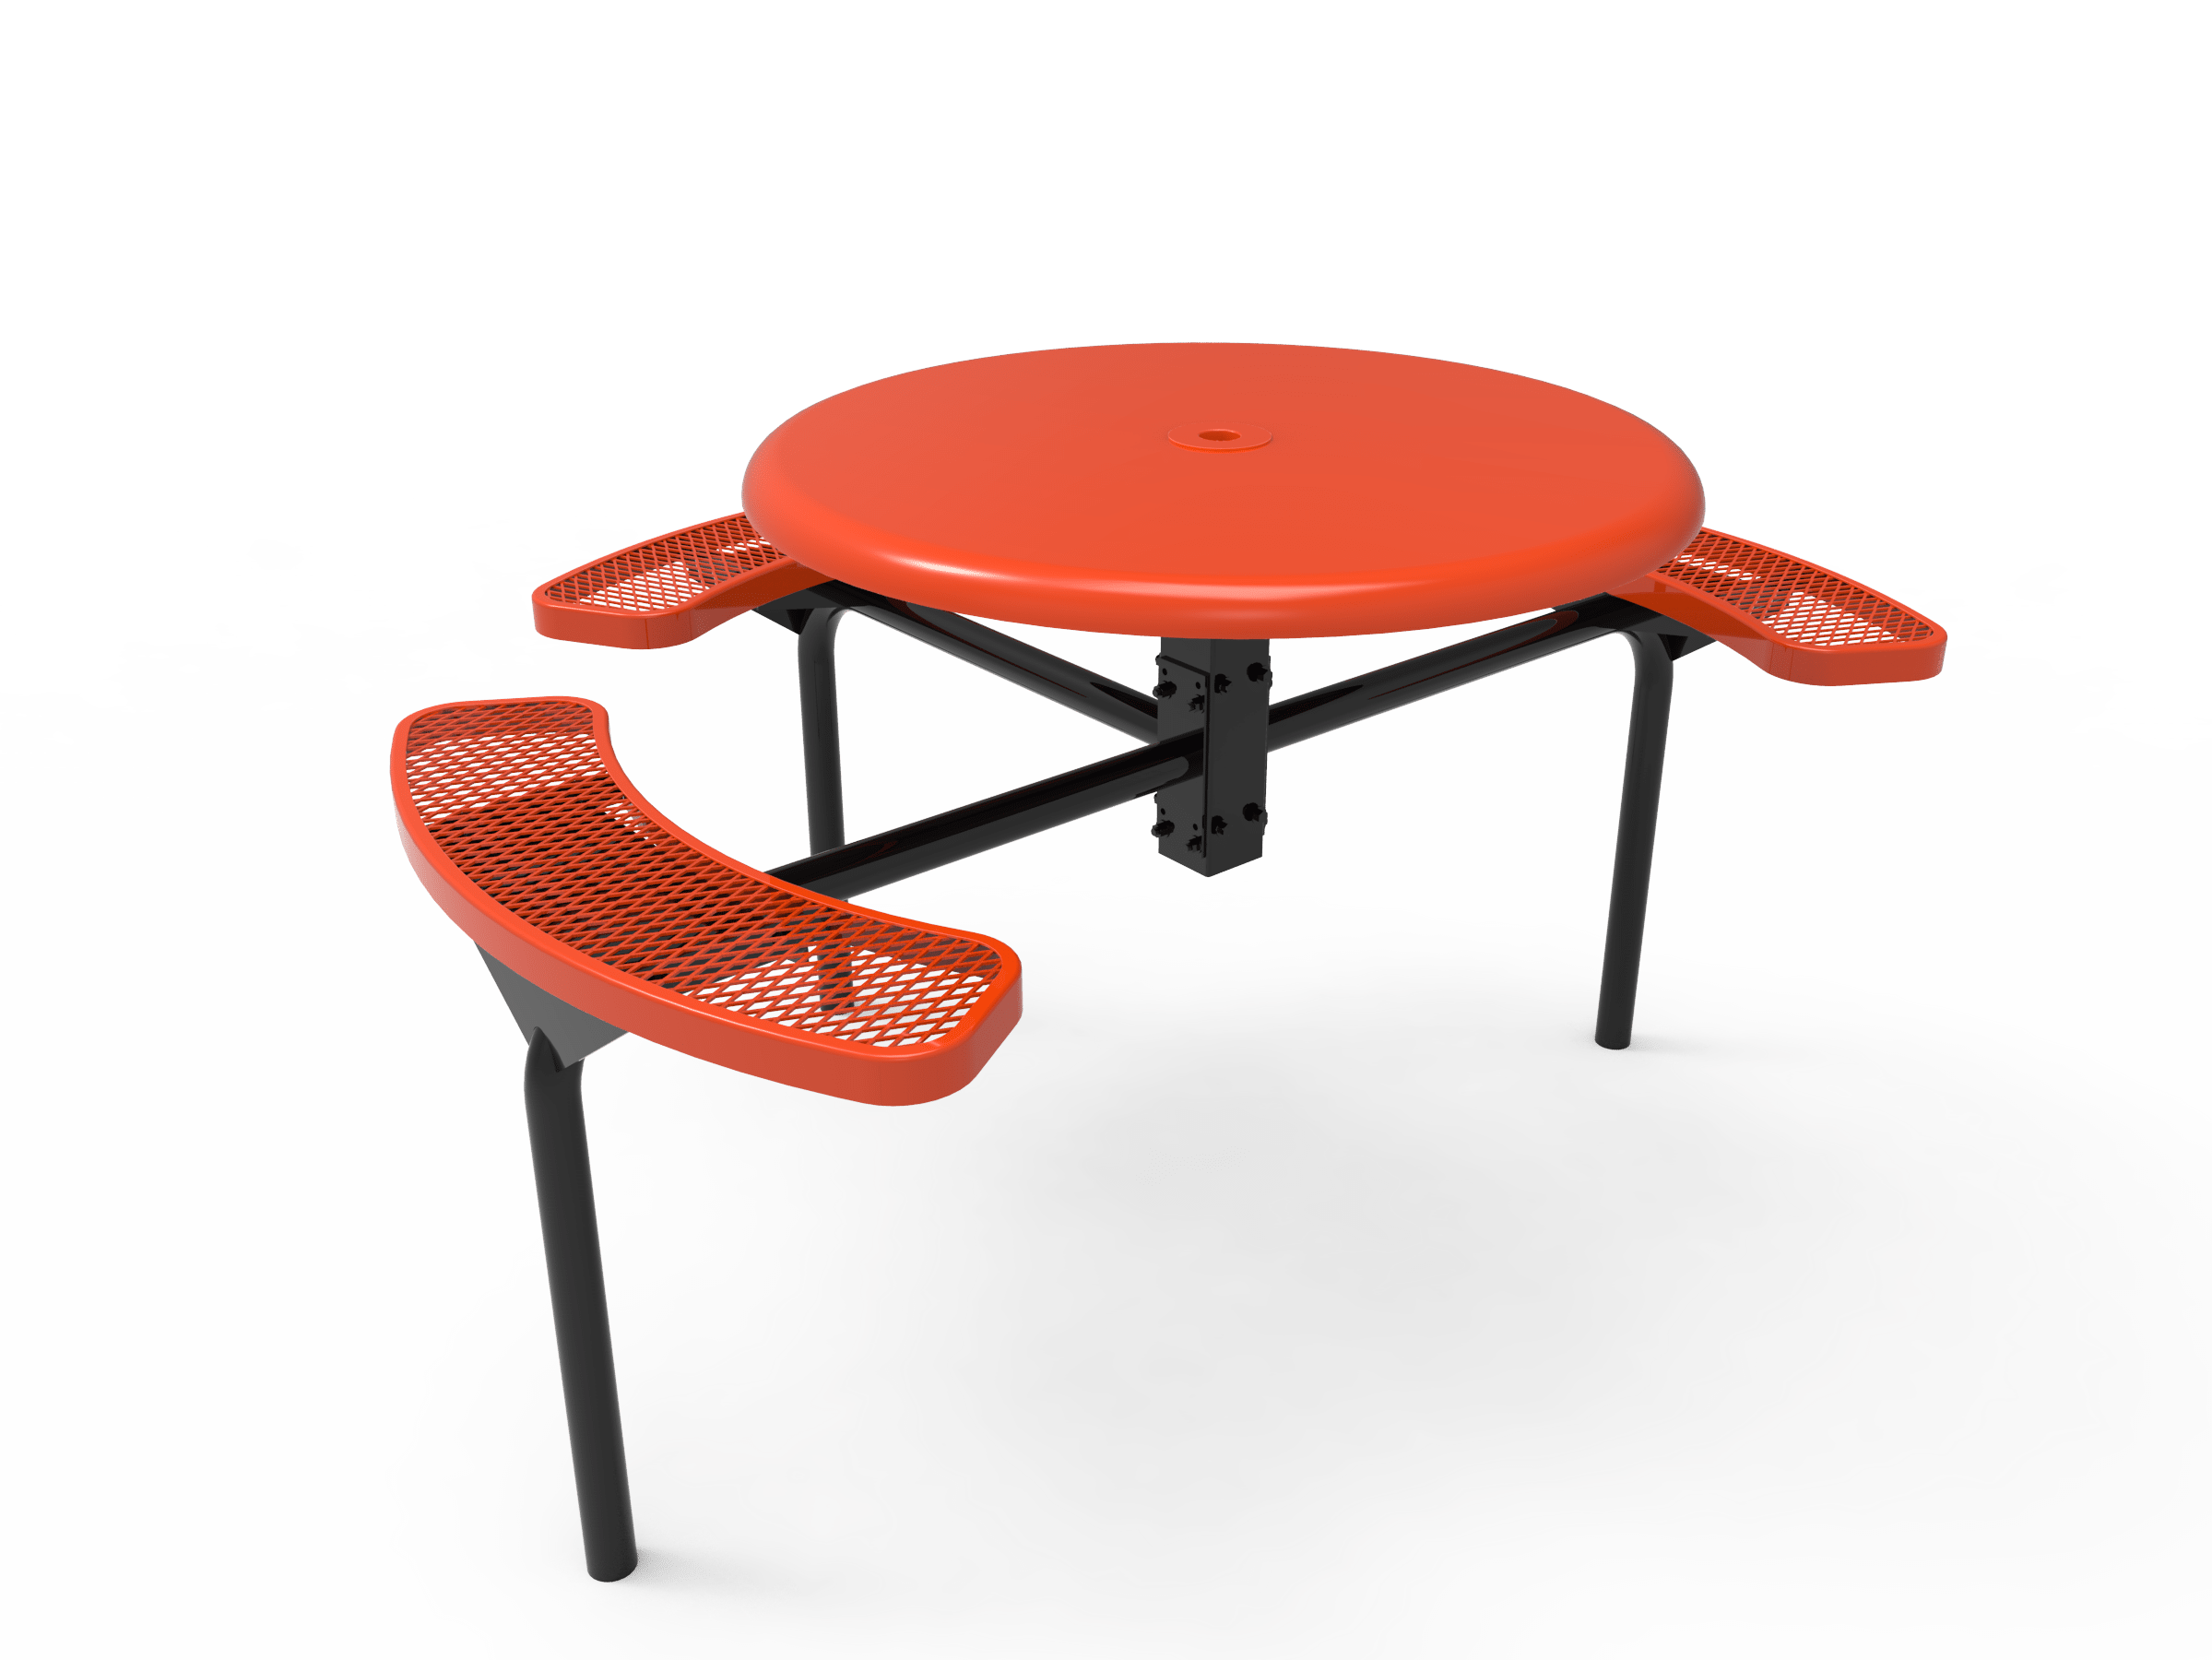 46″ Round Solid Top Nexus In Ground Table With 3 Seats-Mesh
TRS46-C-49-013
Industry Standard Finish
$1569.00
TRS46-A-49-013
Advantage Premium Finish
$1969.00
